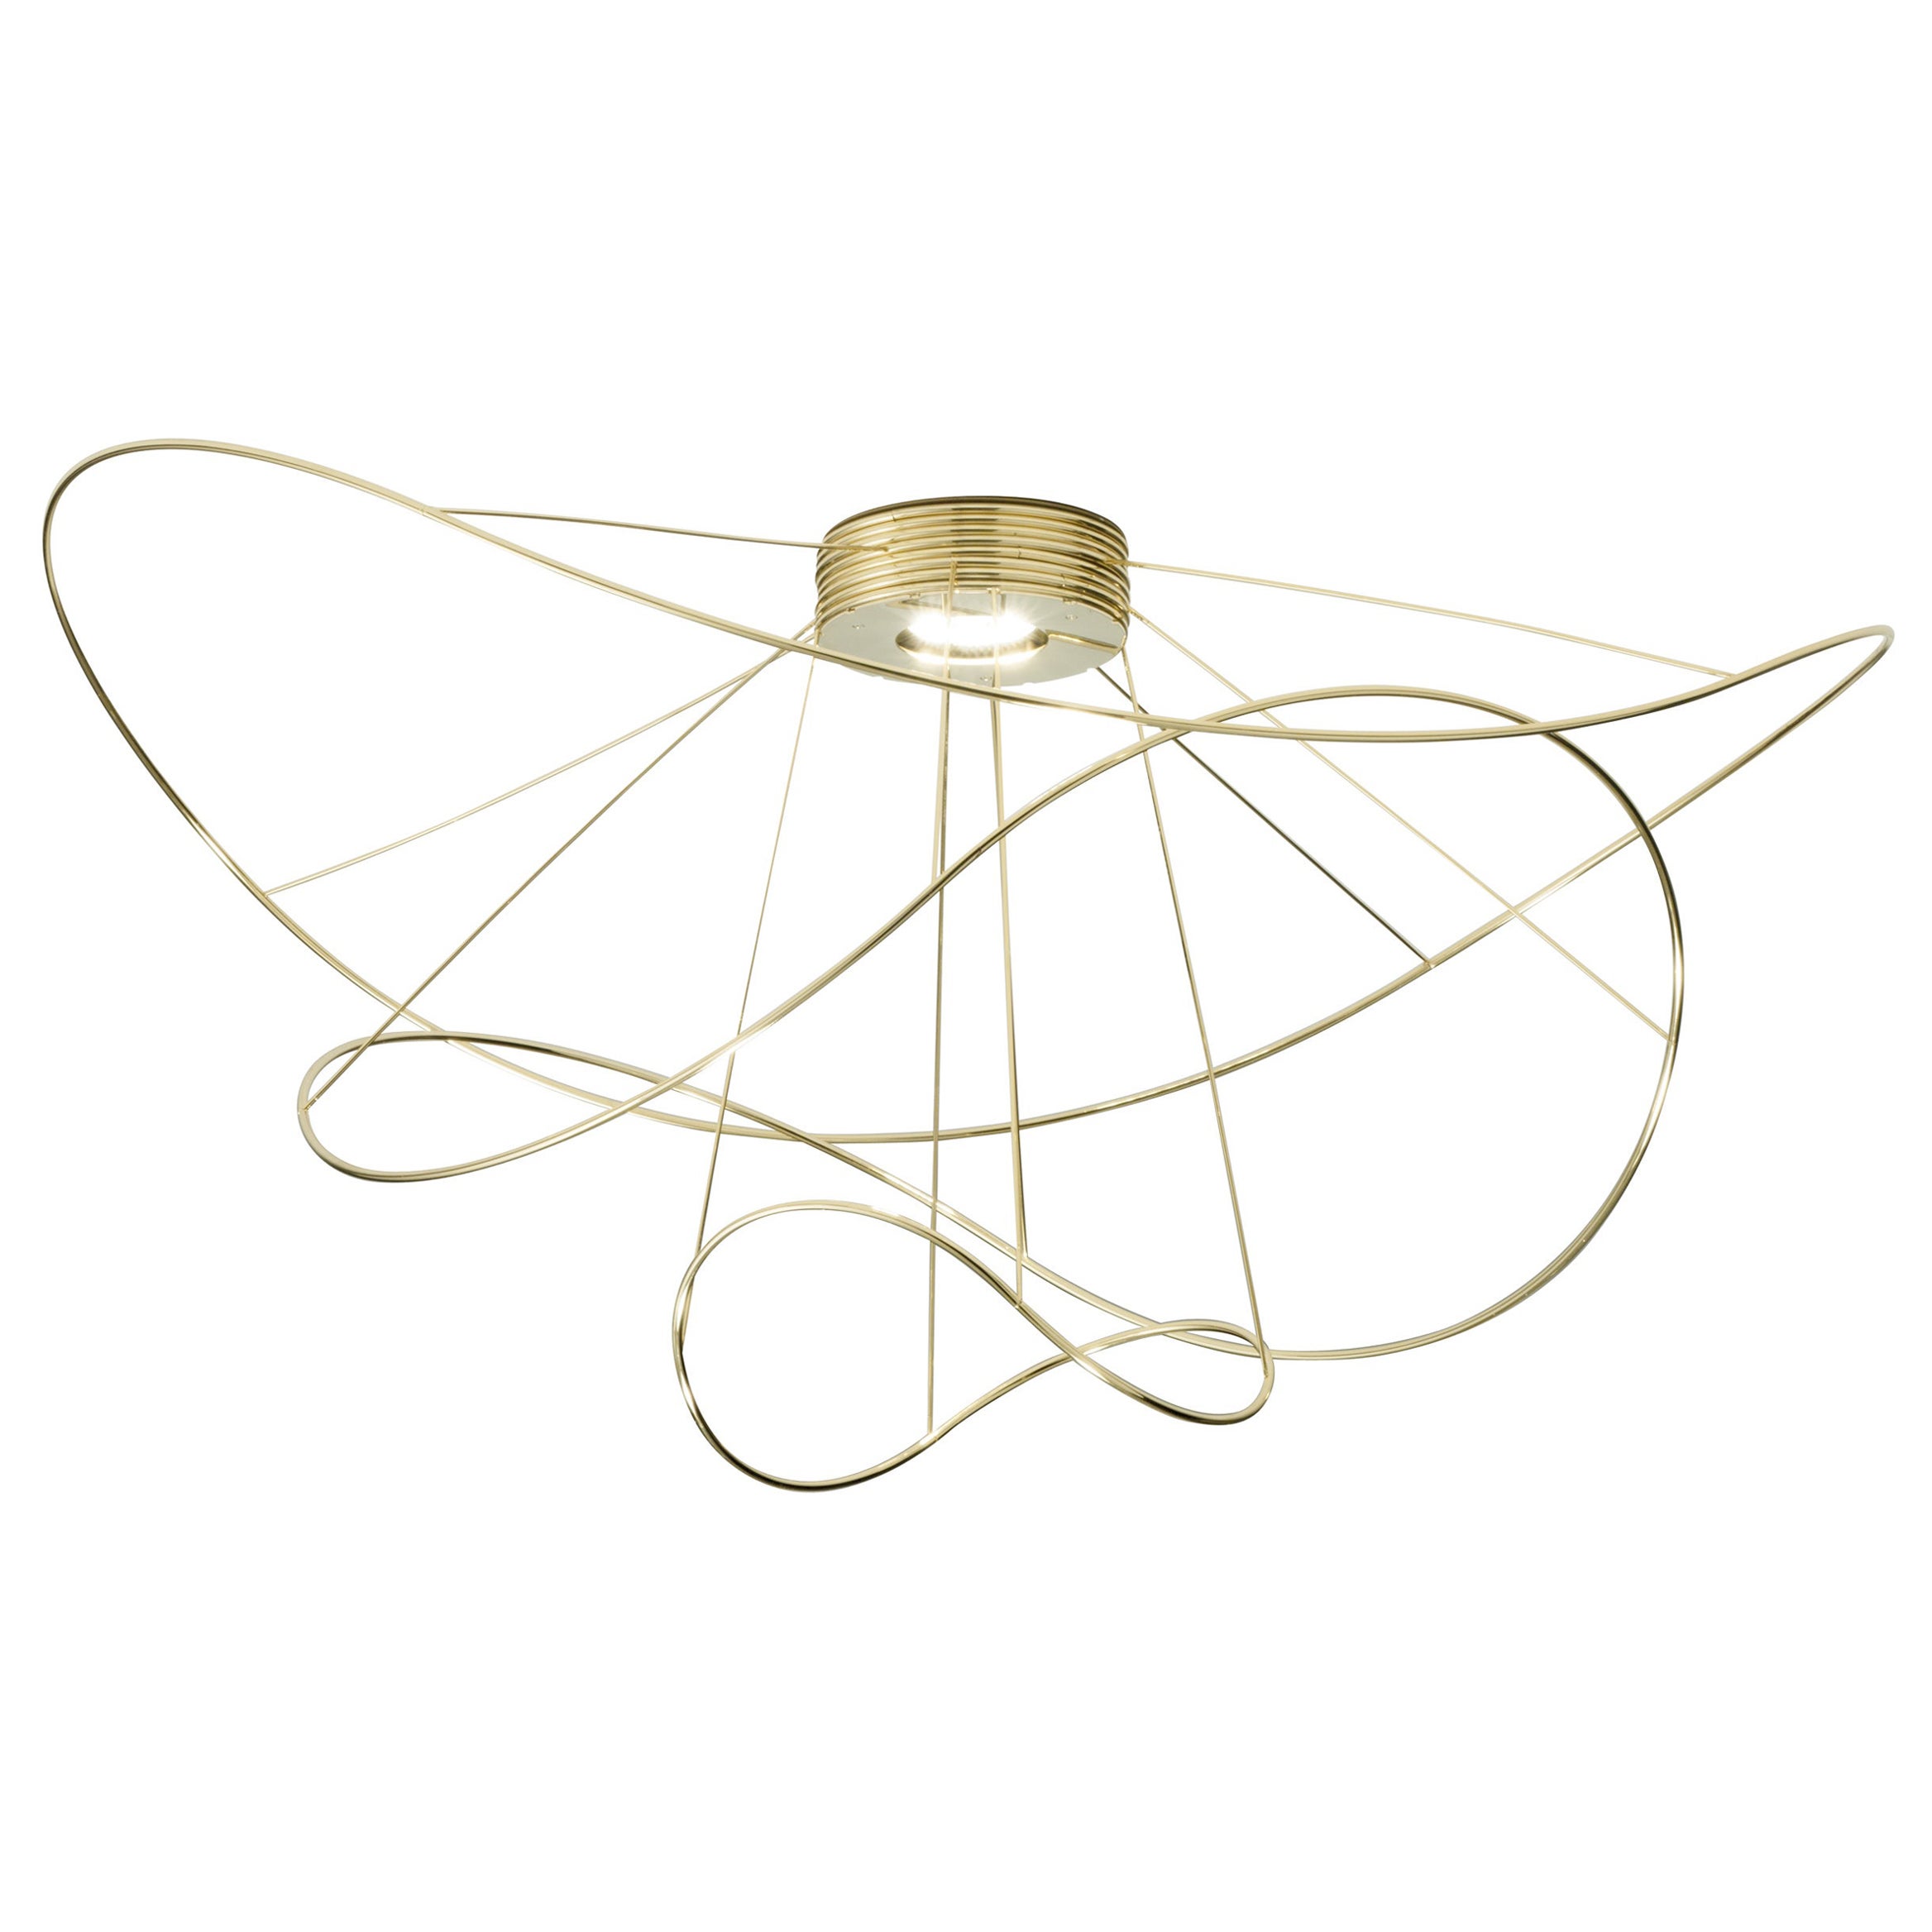 Axolight Hoops 3 Medium Flush Mount Ceiling Lamp in Gold by Giovanni Barbato For Sale